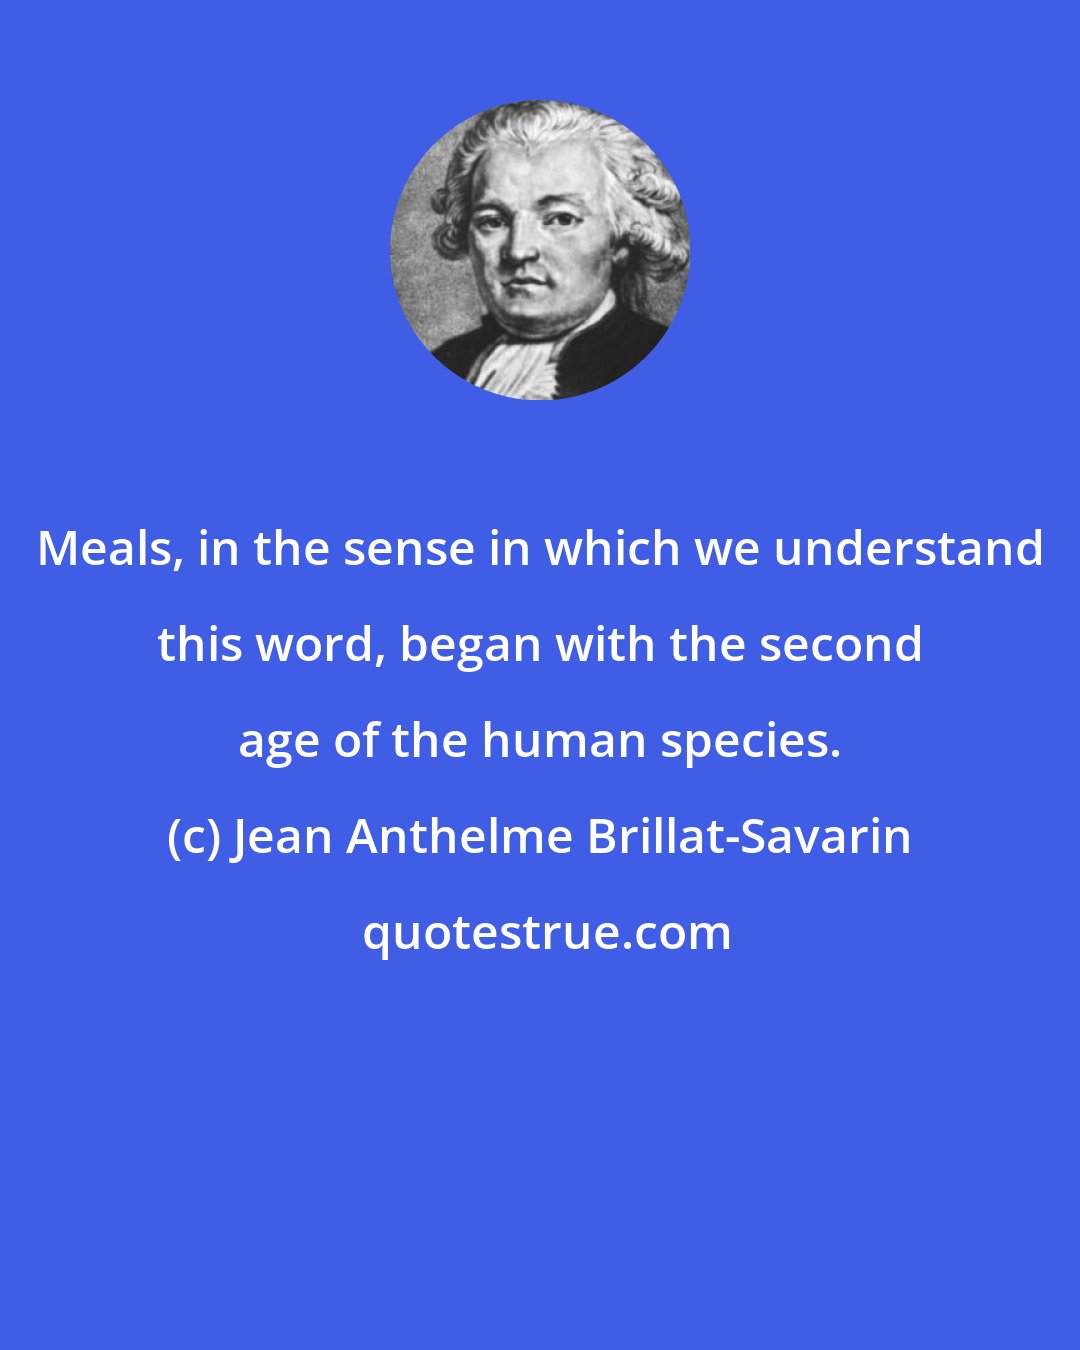 Jean Anthelme Brillat-Savarin: Meals, in the sense in which we understand this word, began with the second age of the human species.